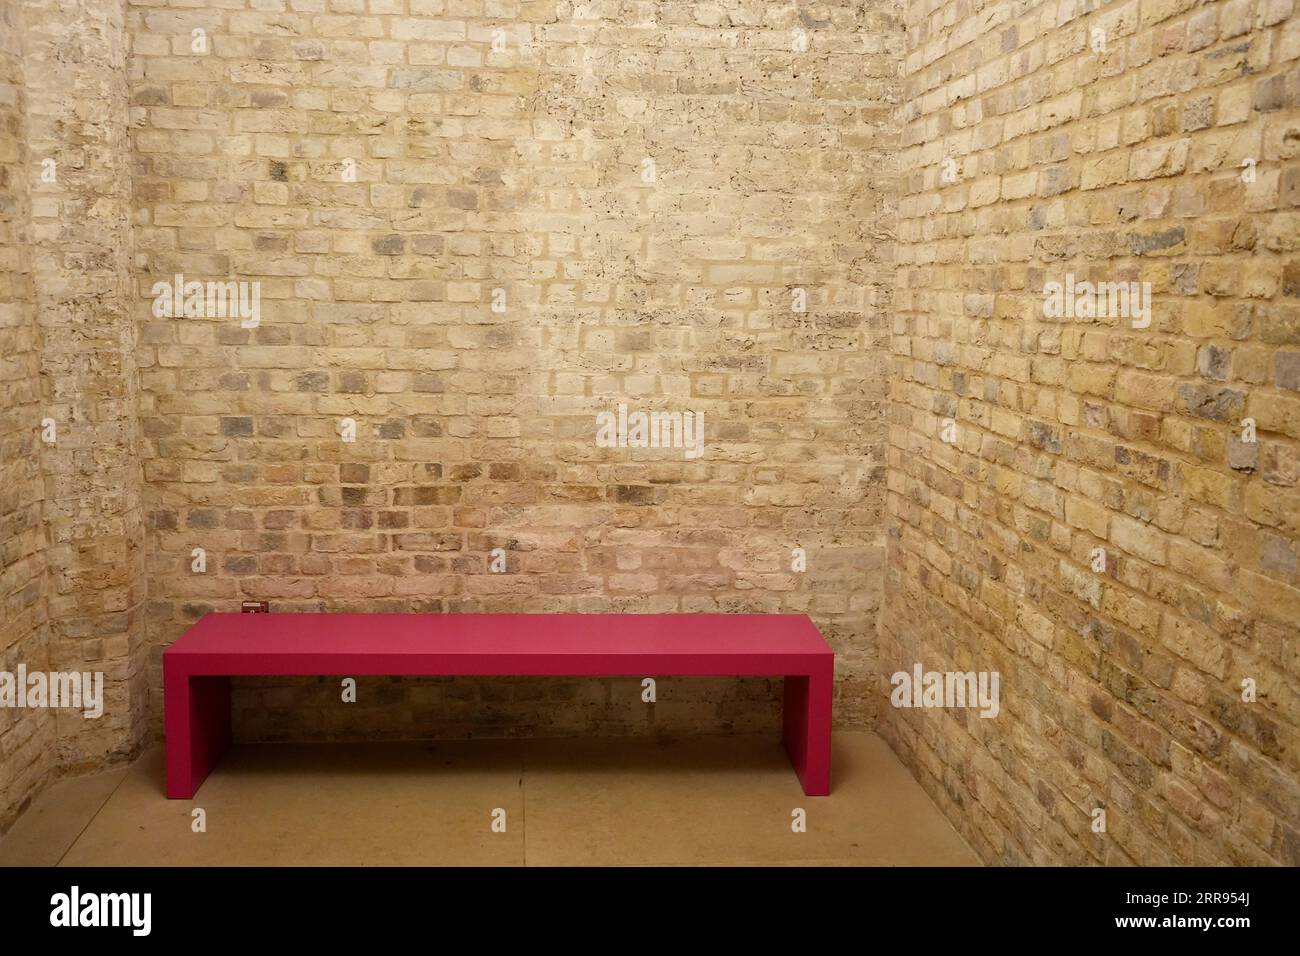 Simple Pink wooden bench in an empty brick room. Stock Photo